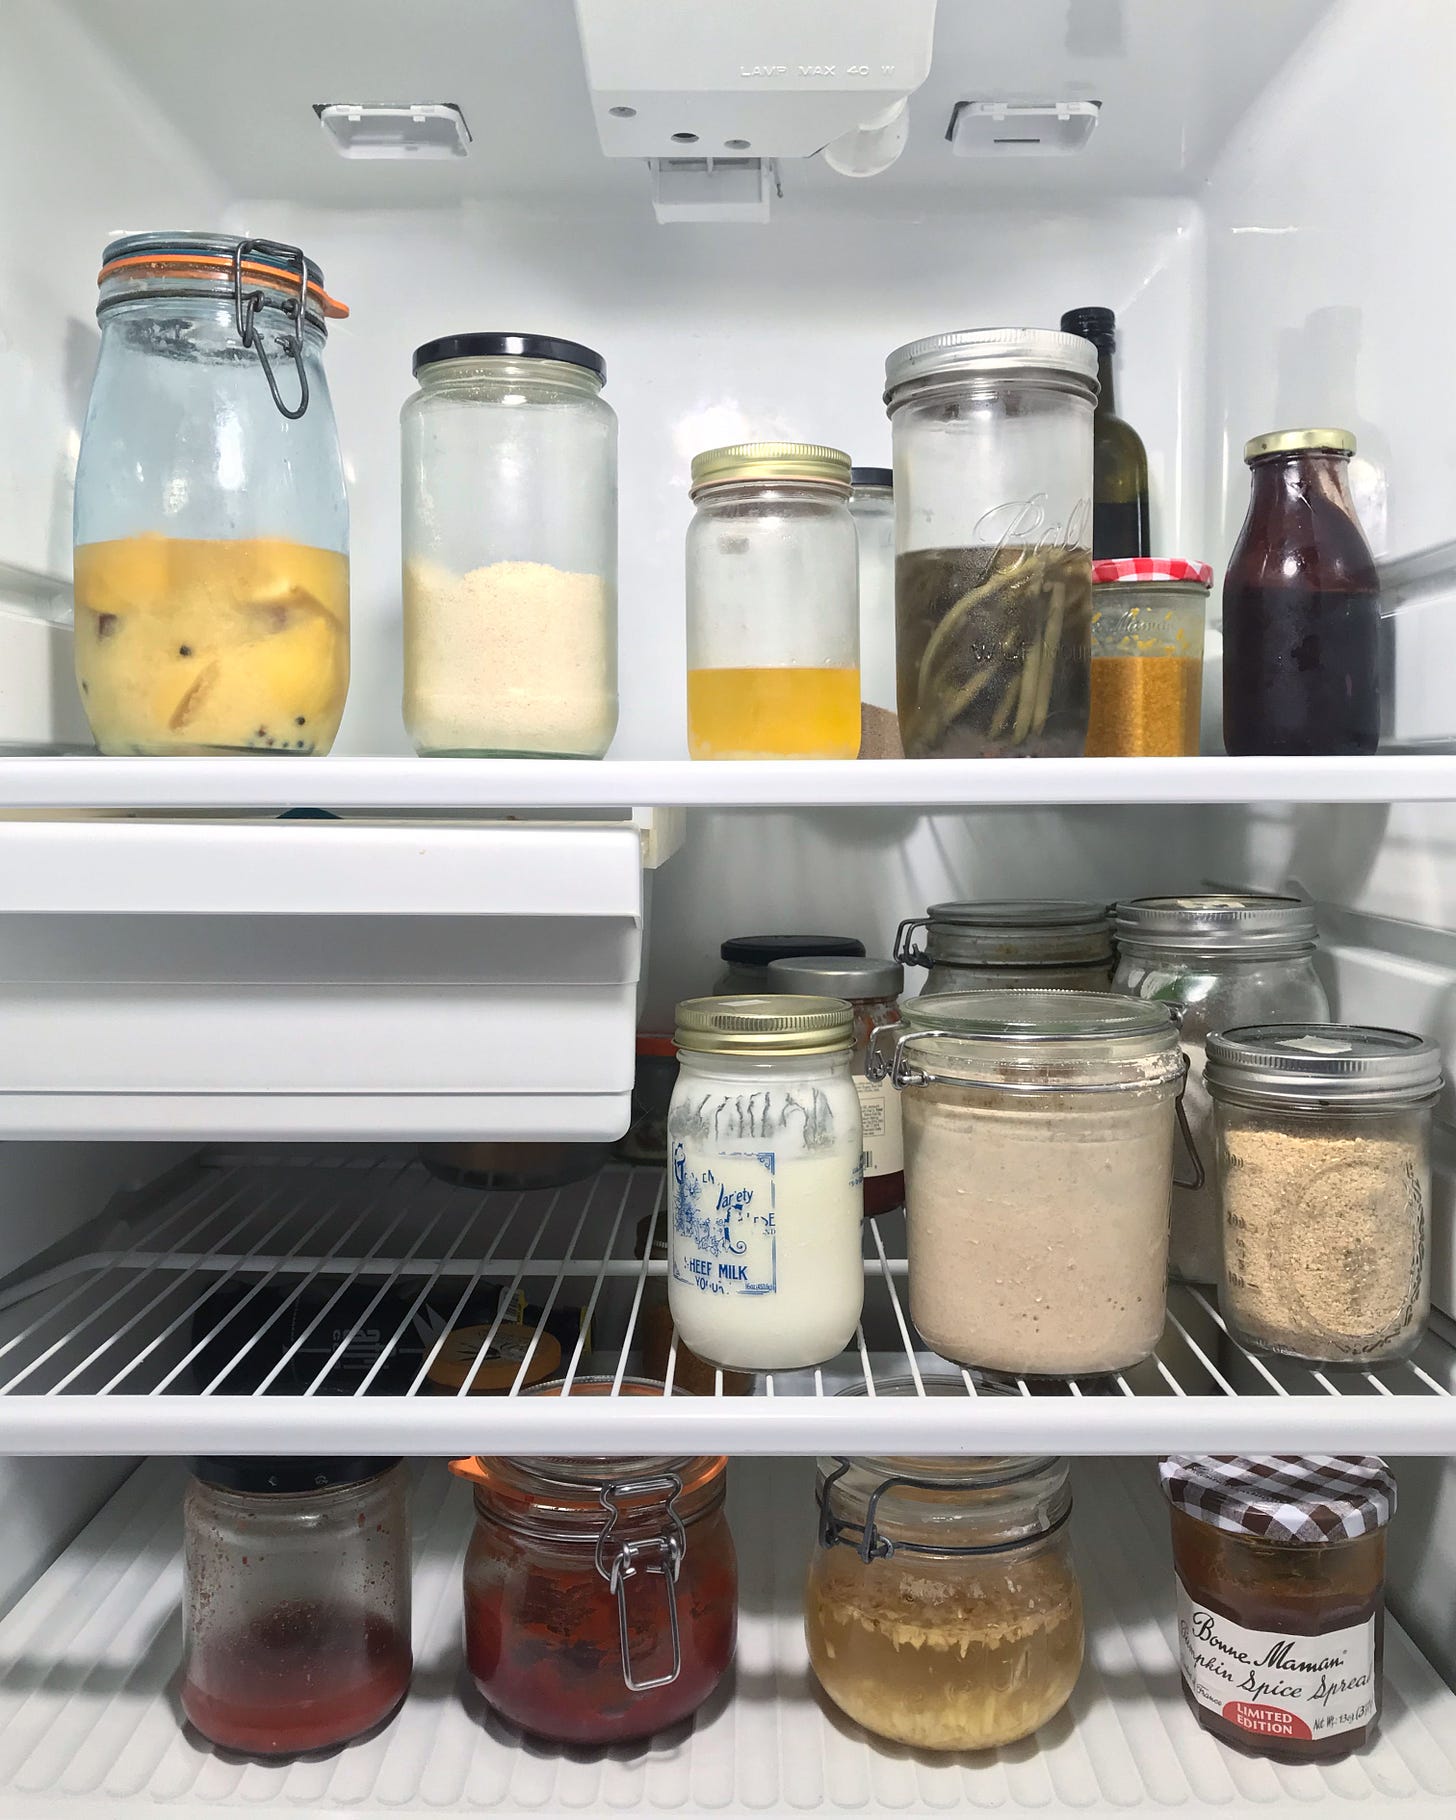 3 shelves in a refrigerator, filled with clear glass jars of various kinds of food